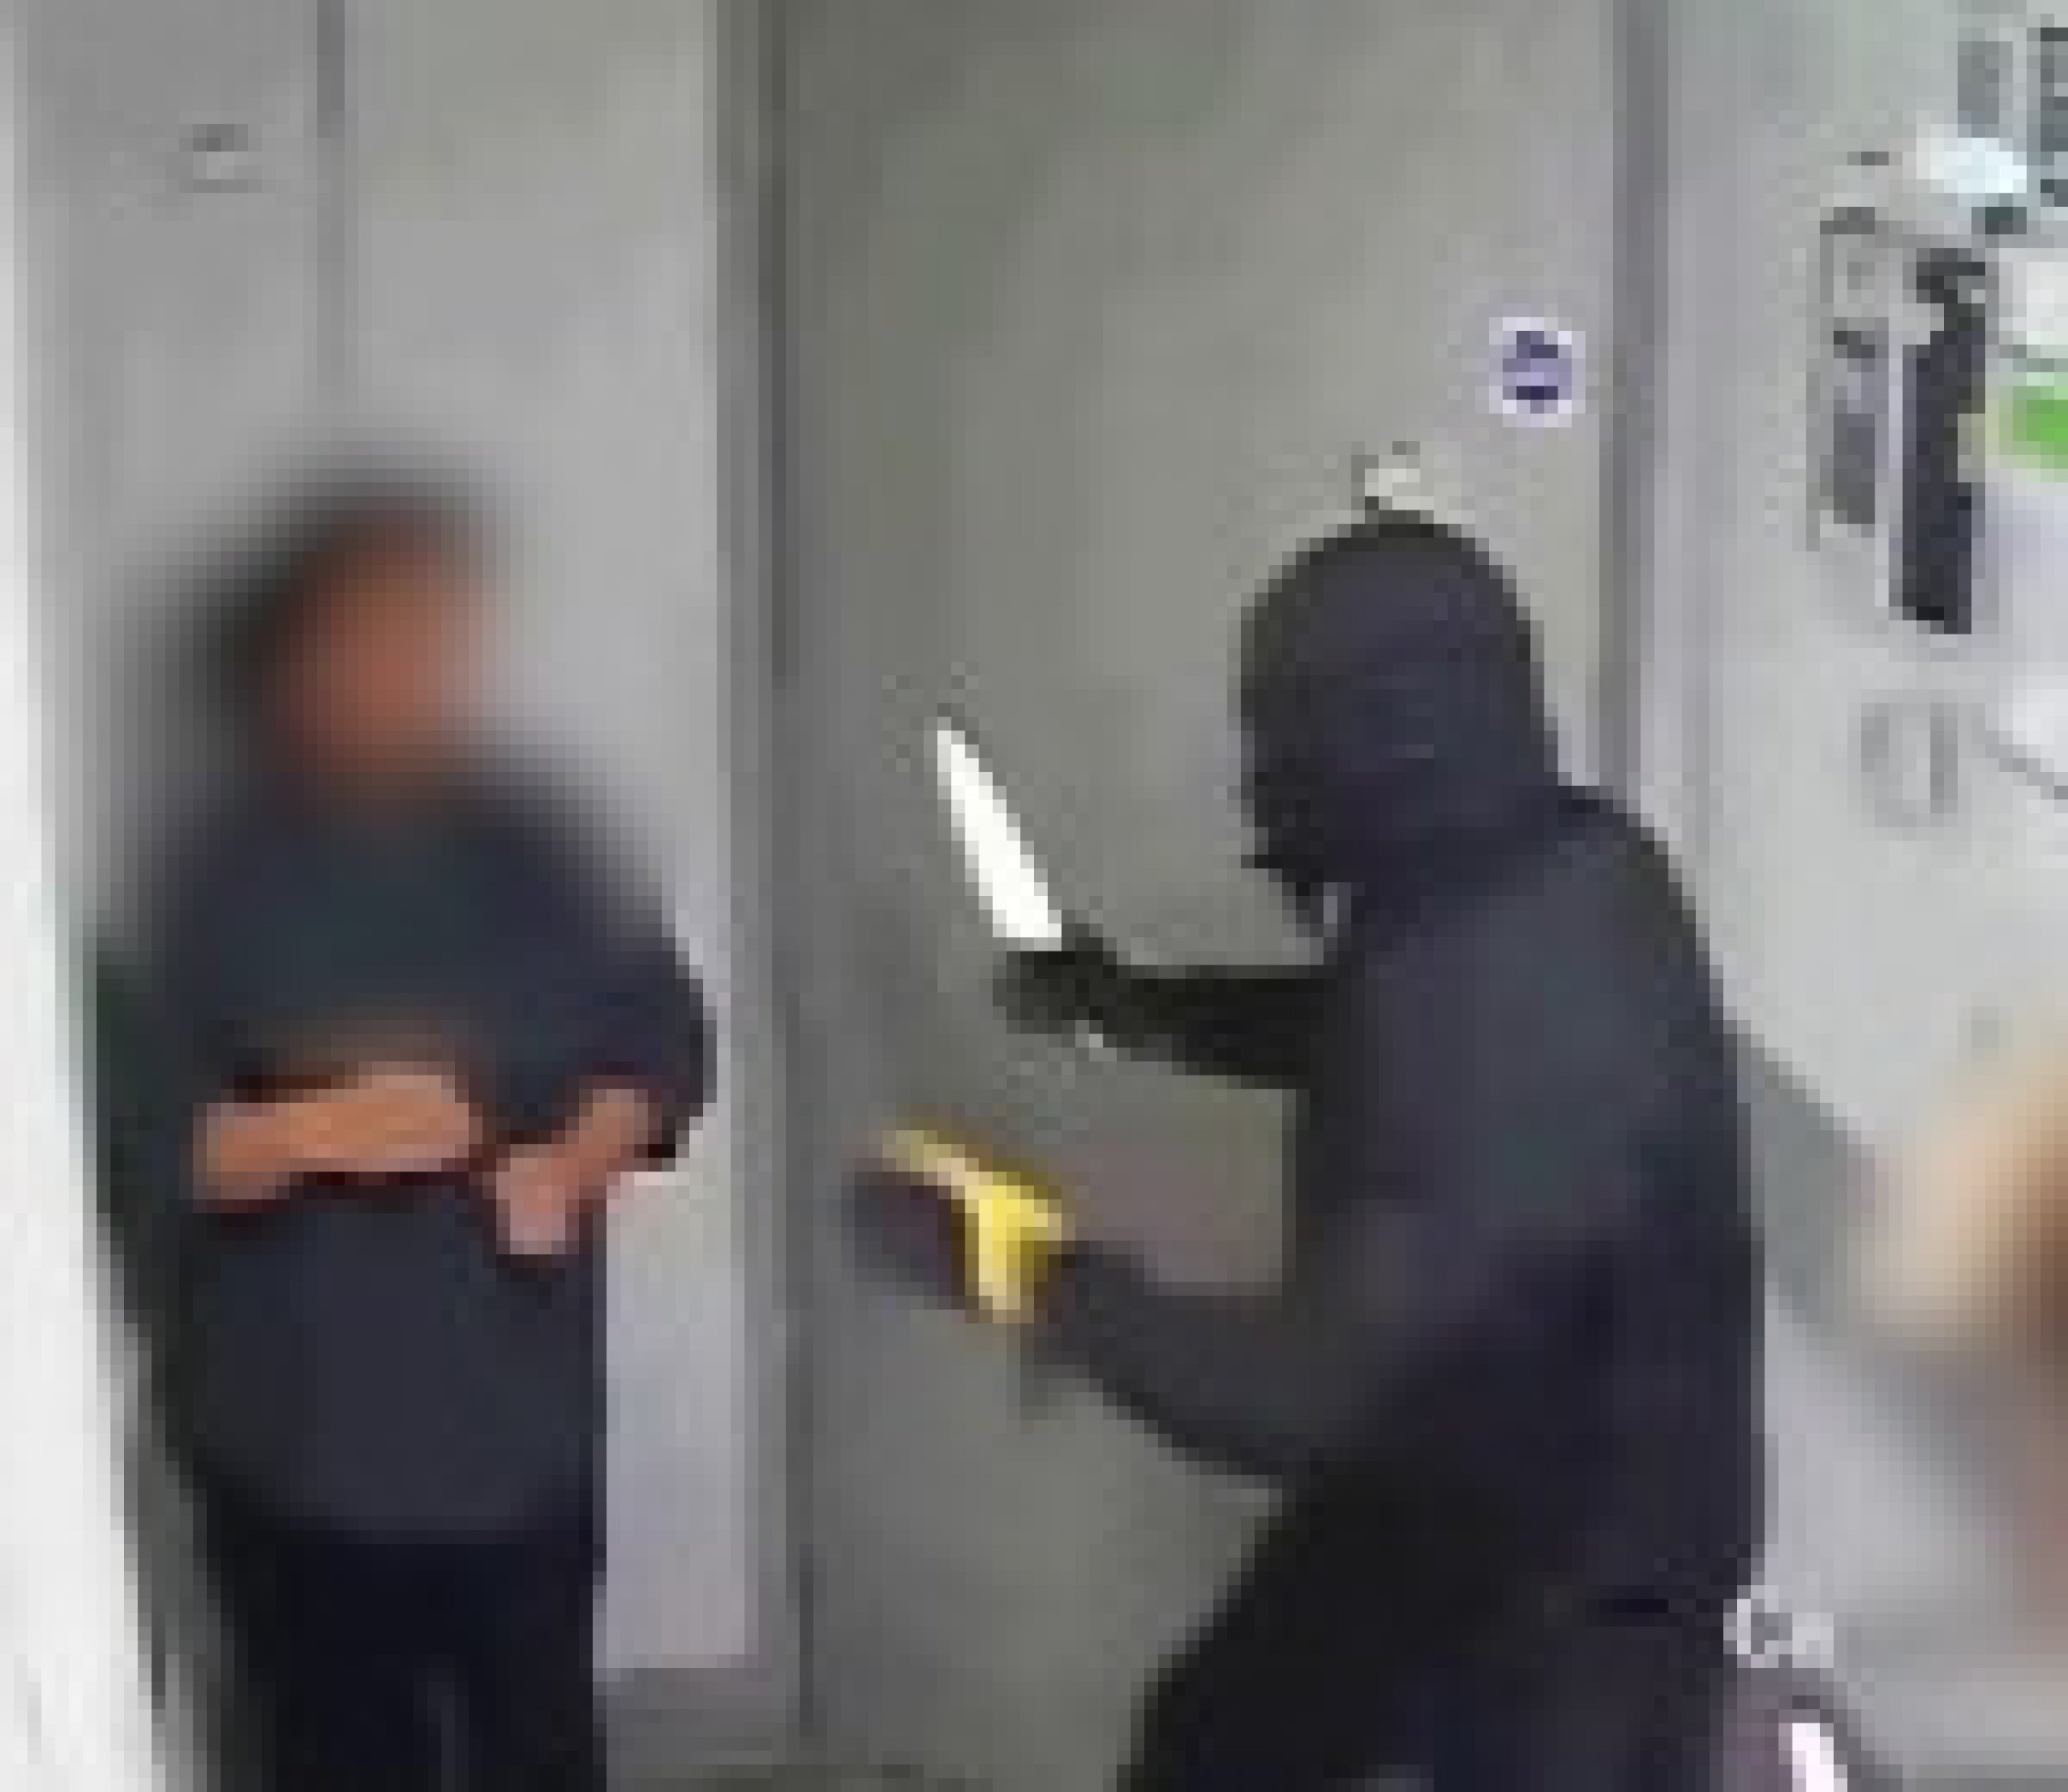 Shocking CCTV footage shows armed robbery in Brighton